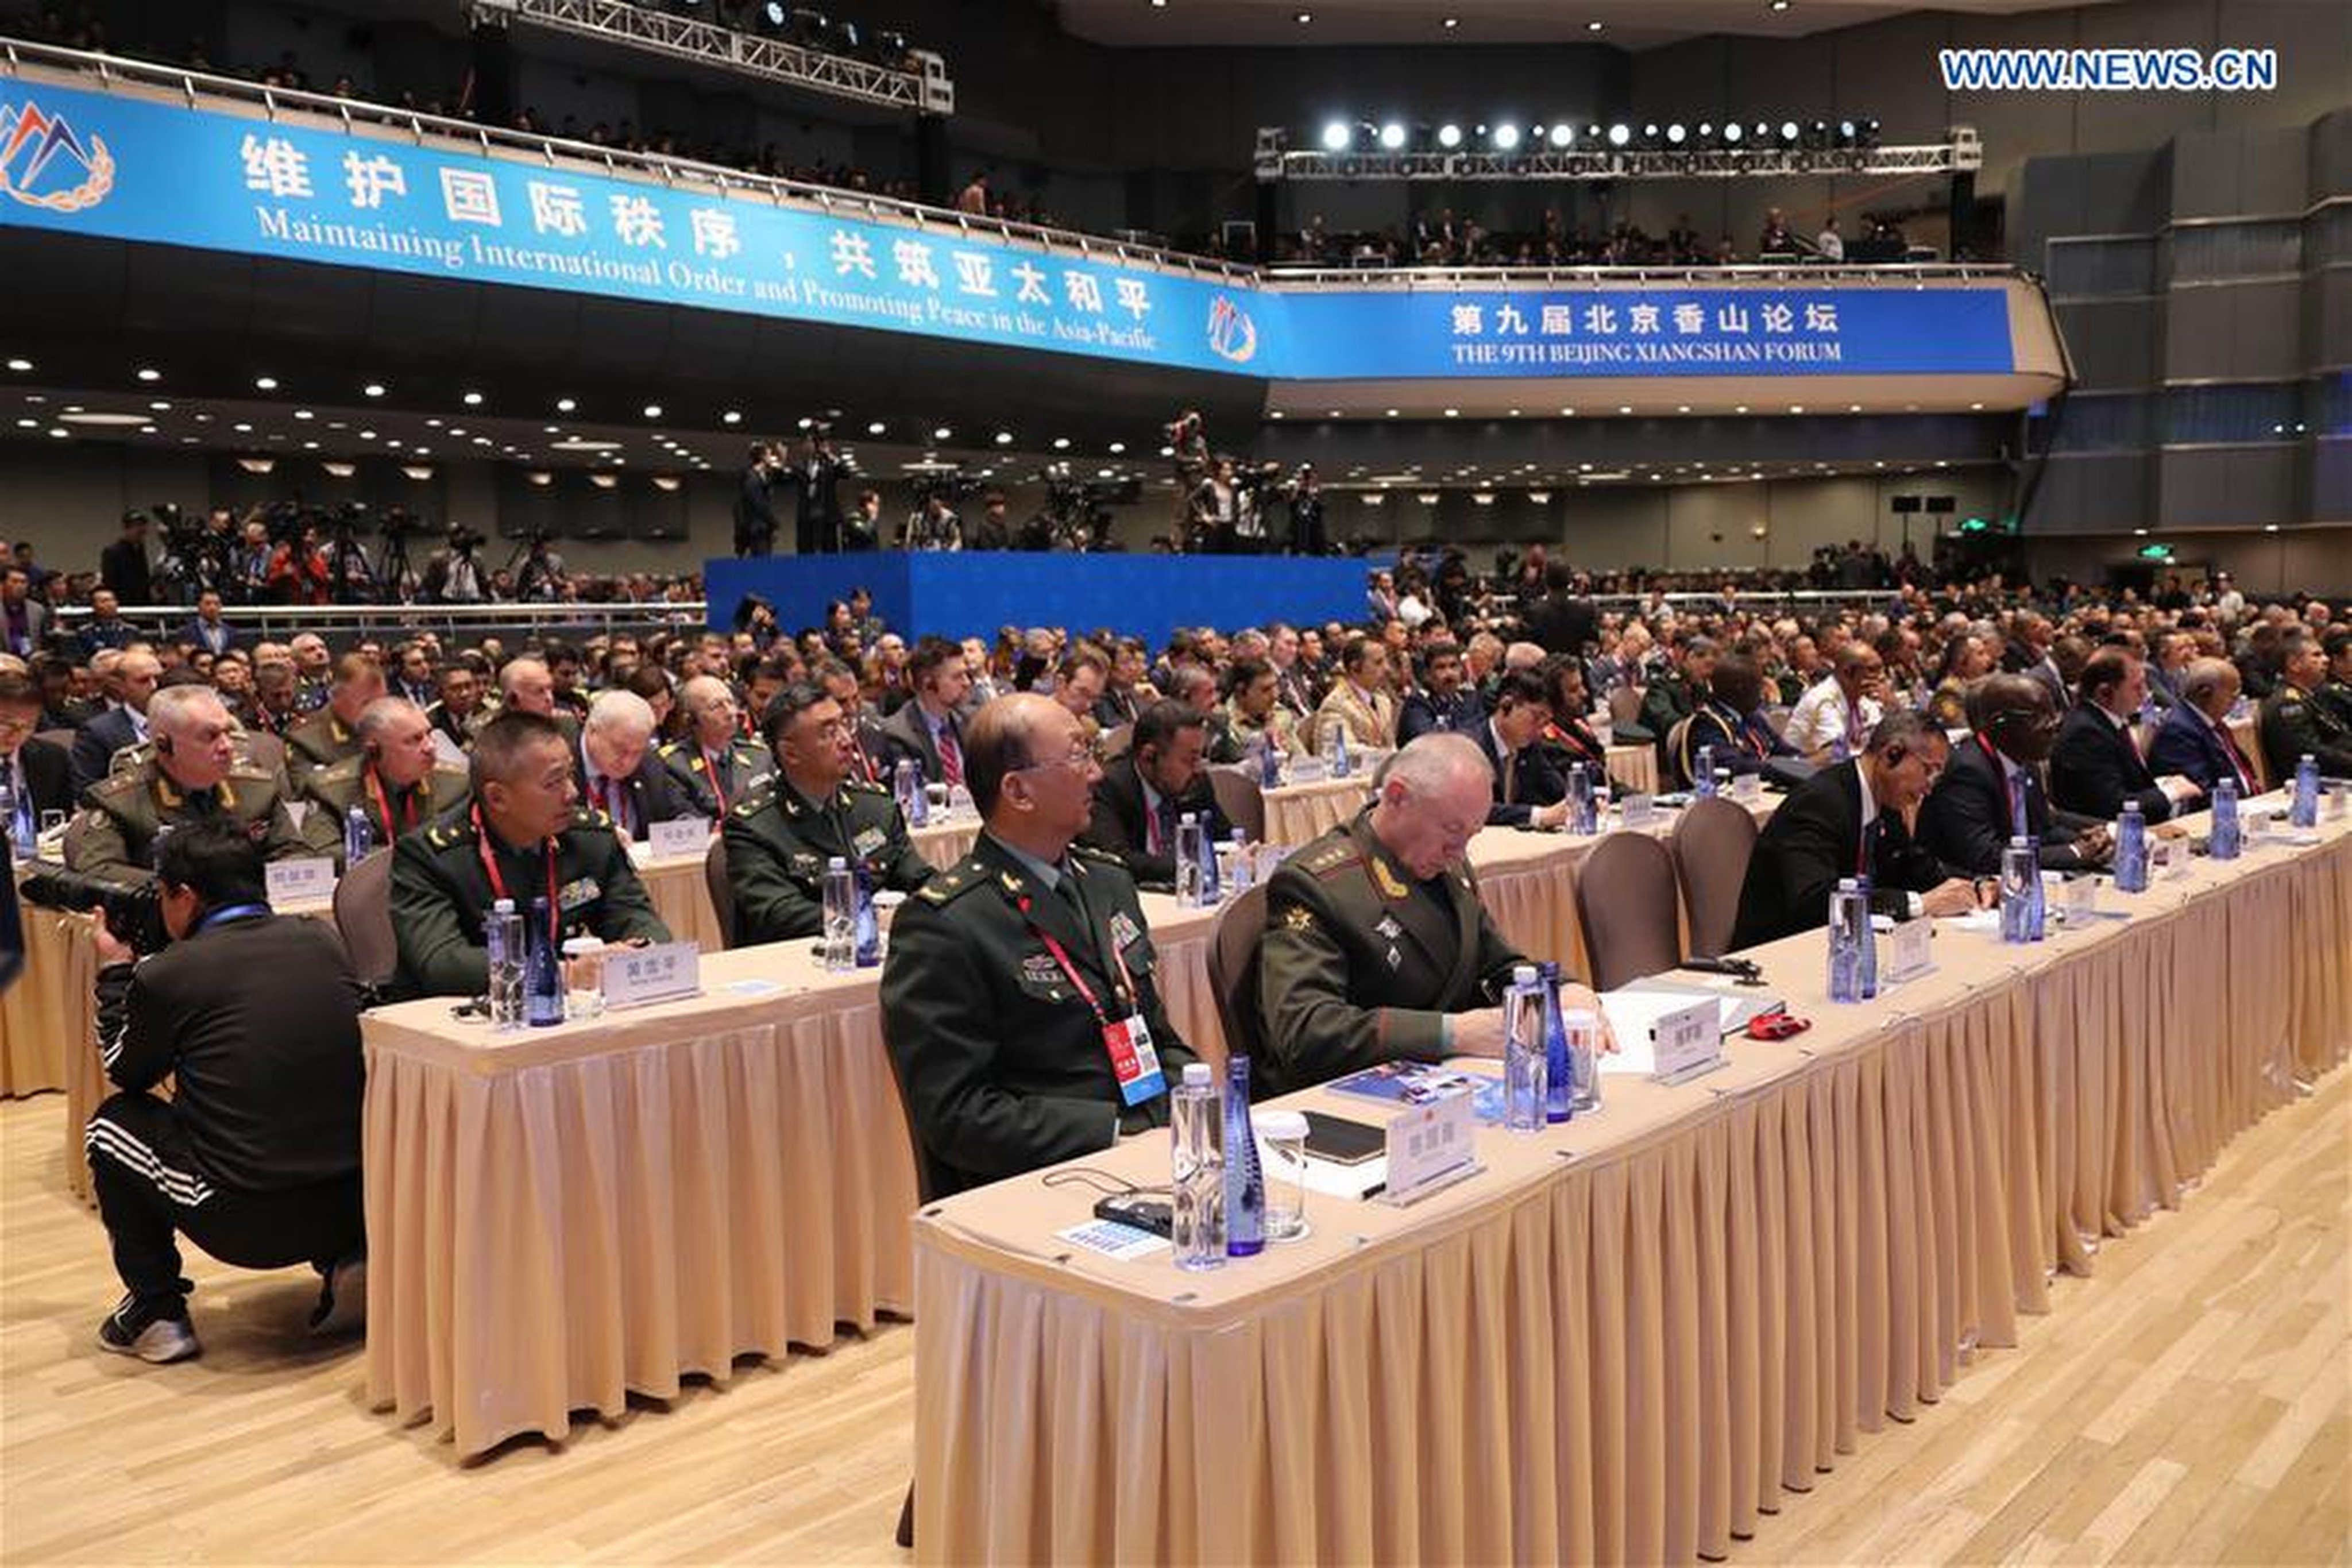 The last in-person Xiangshan Forum was held in Beijing in 2019 before being cancelled or held virtually. This year’s forum may host high-level talks between the PLA and the Pentagon, analysts say. Photo: Xinhua